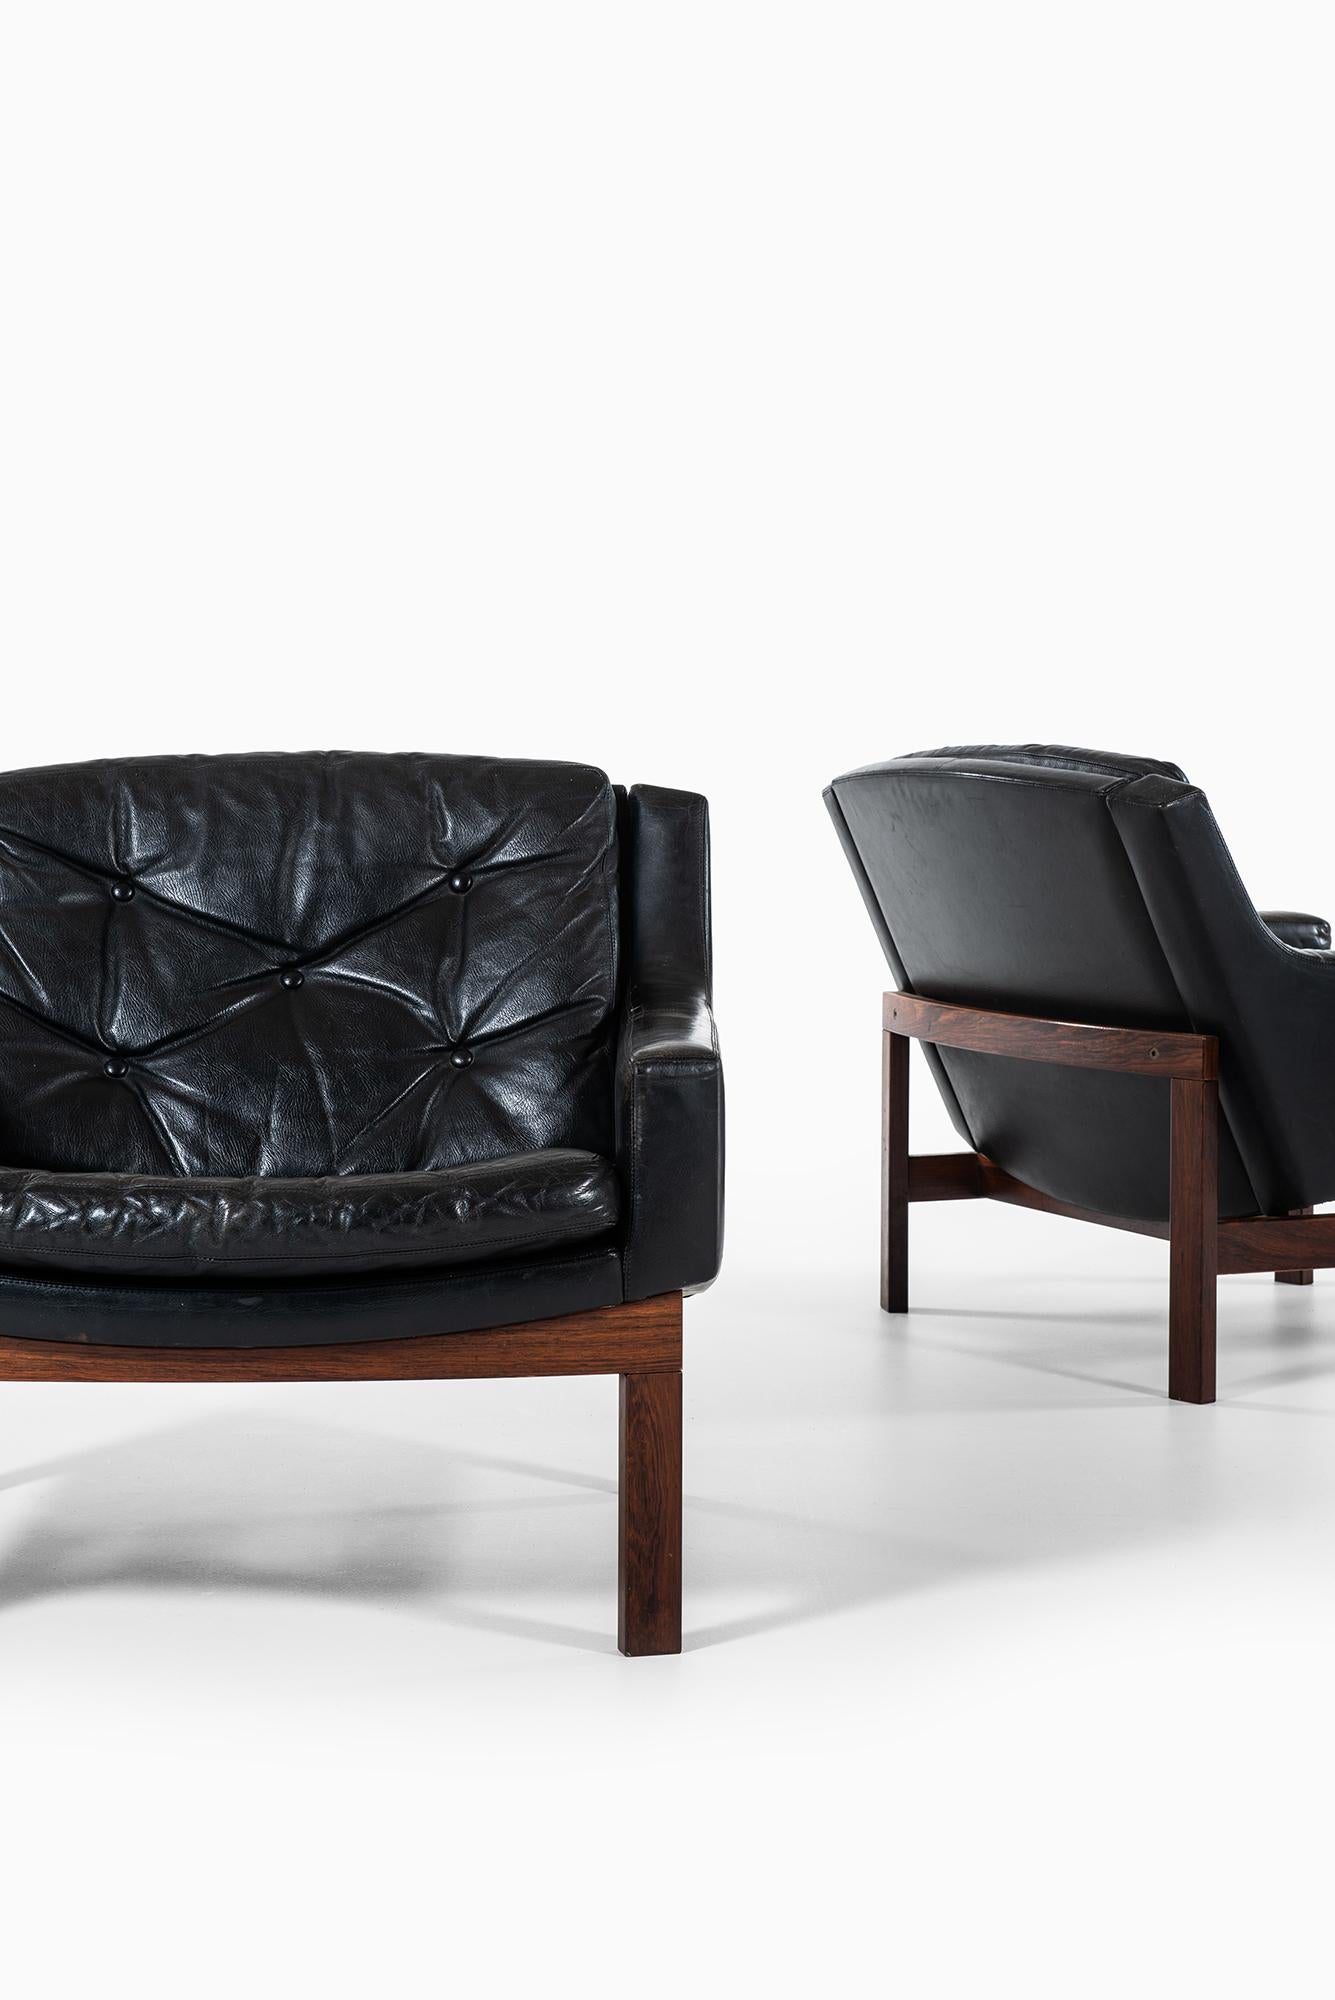 Pair of easy chairs by unknown designer. Produced in Sweden.